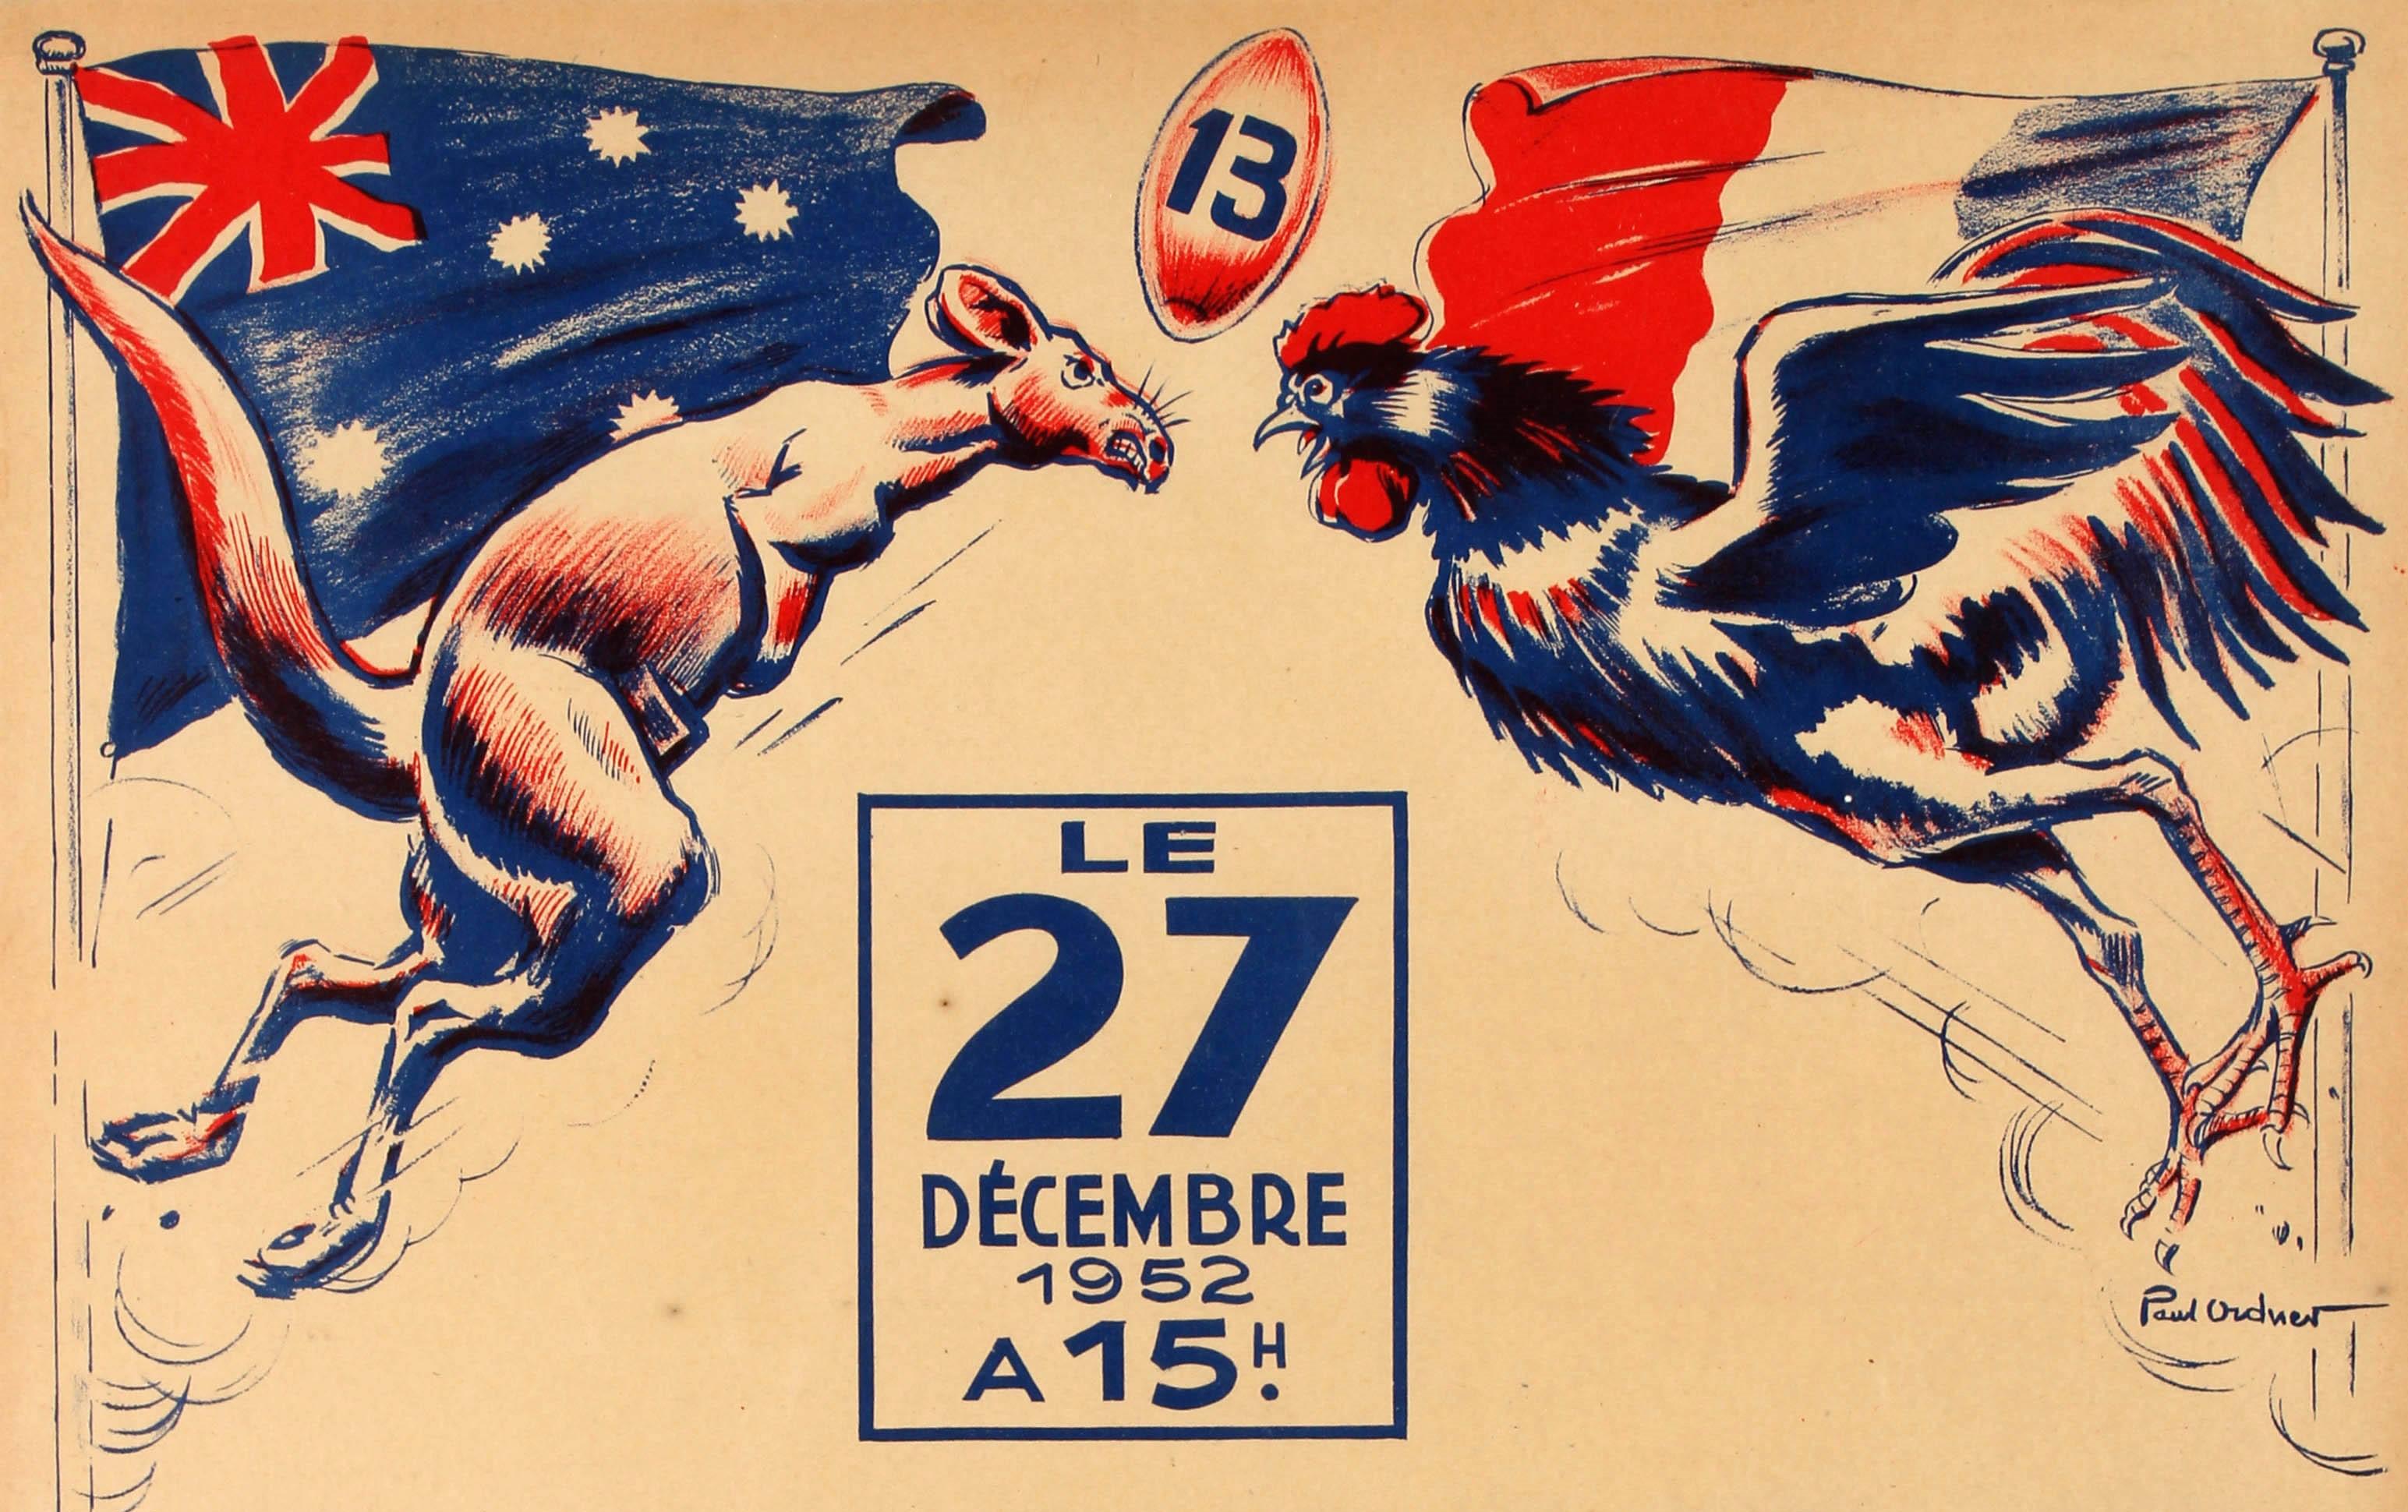 Rare original vintage sport event poster advertising the rugby test game between France and Australia held at the Parc des Princes in Paris on 27 December 1952. Dynamic design by Paul Ordner (1900-1969) showing a kangaroo (symbol of the Australian